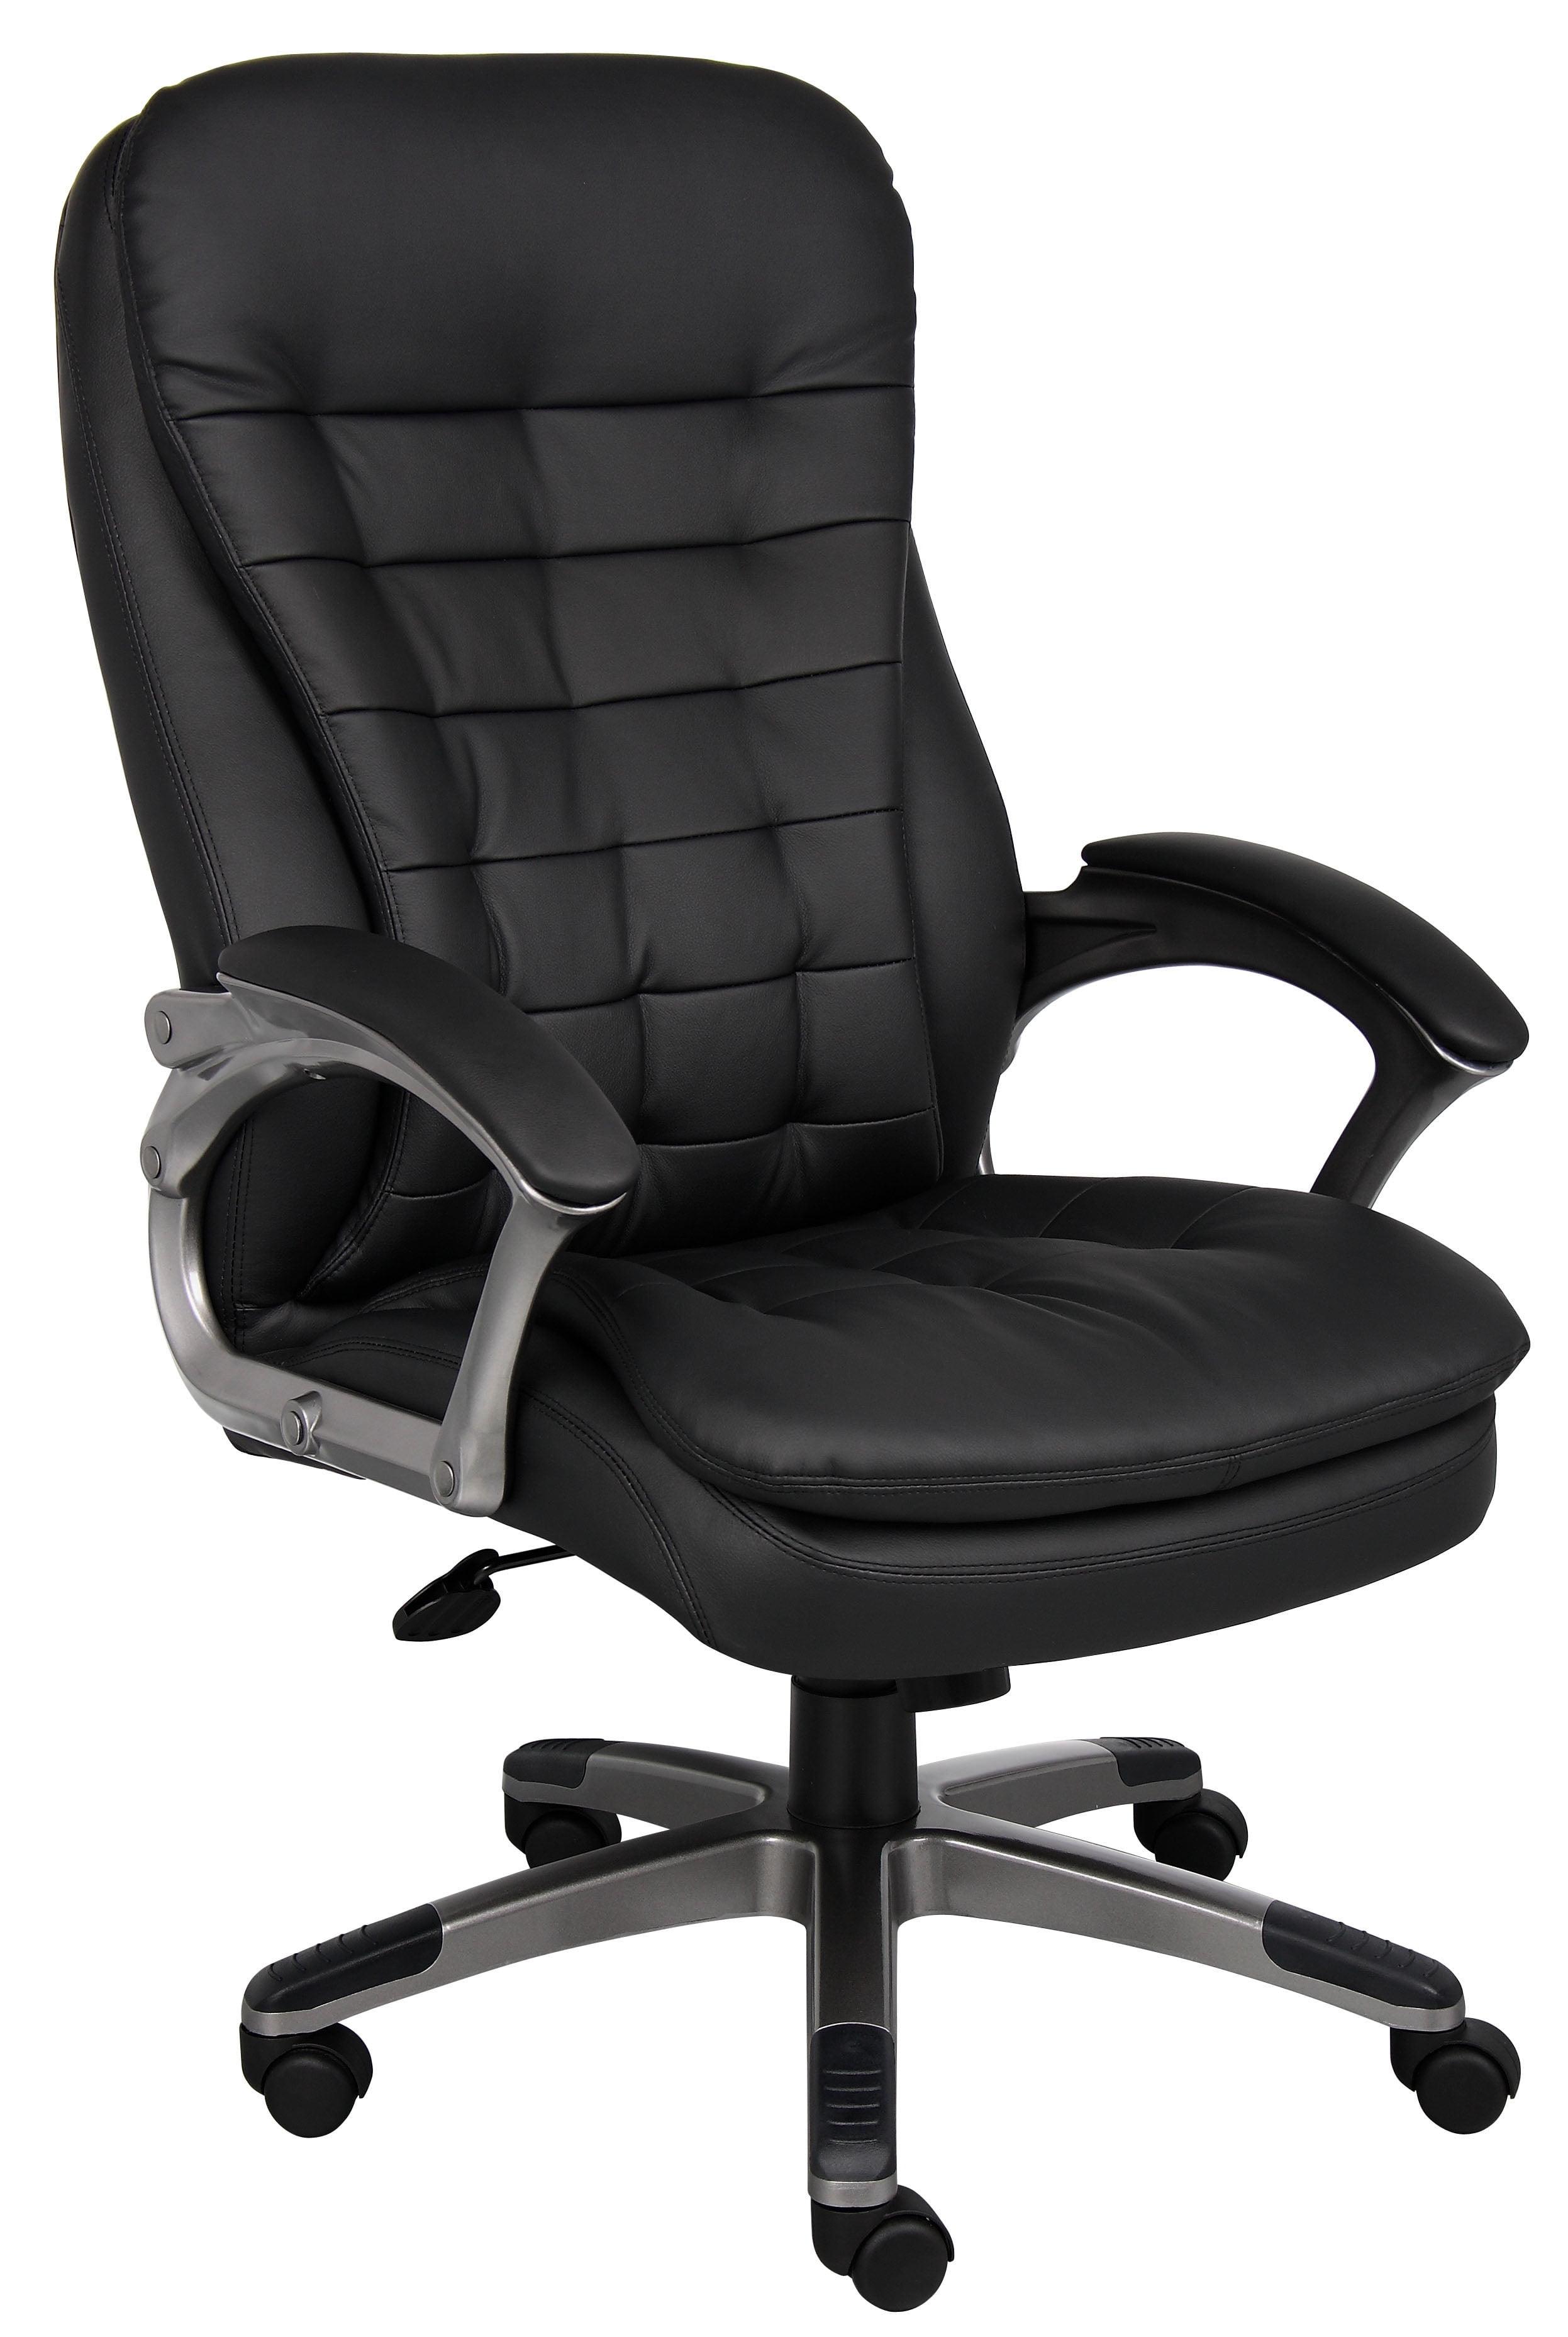 Ergonomic High-Back Executive Chair in Black Leather and Metal